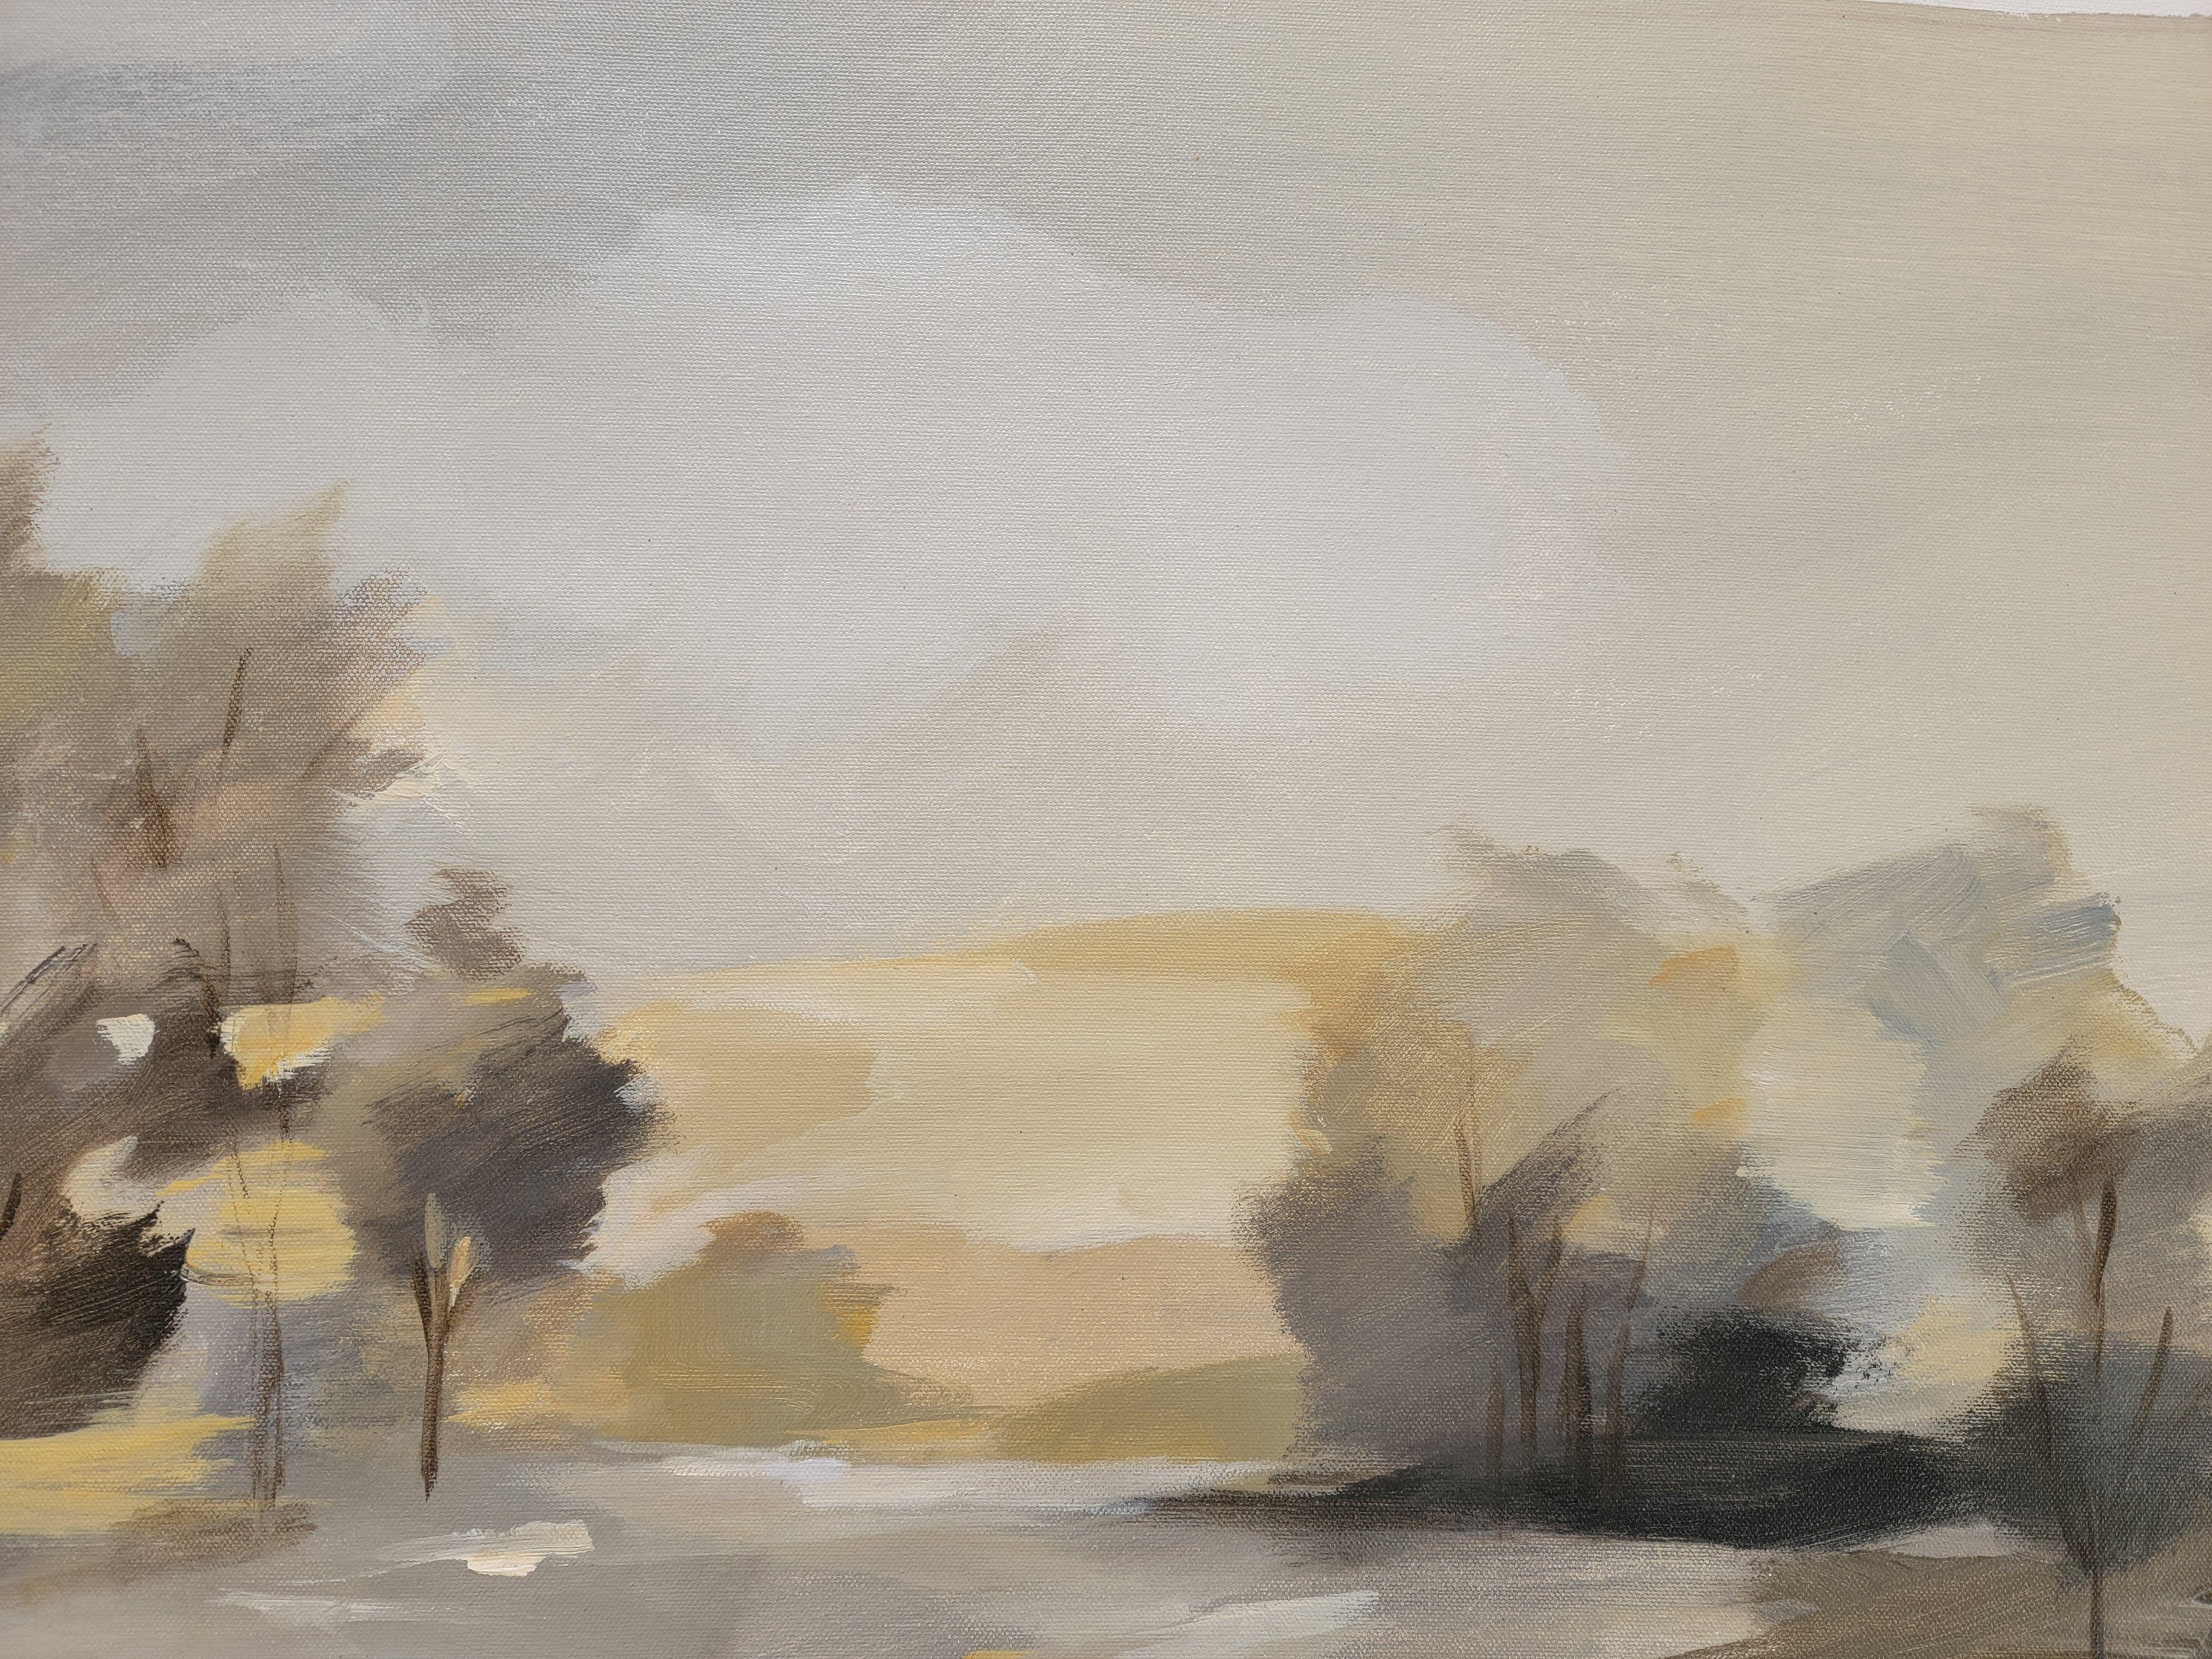 This rustic painting is expressive and monochromatic. The simple landscape picturing sky, trees and river is painted with bold brush strokes and has the fresh look of a sketch with a very limited use of color. White, black and yellow ochre mix and